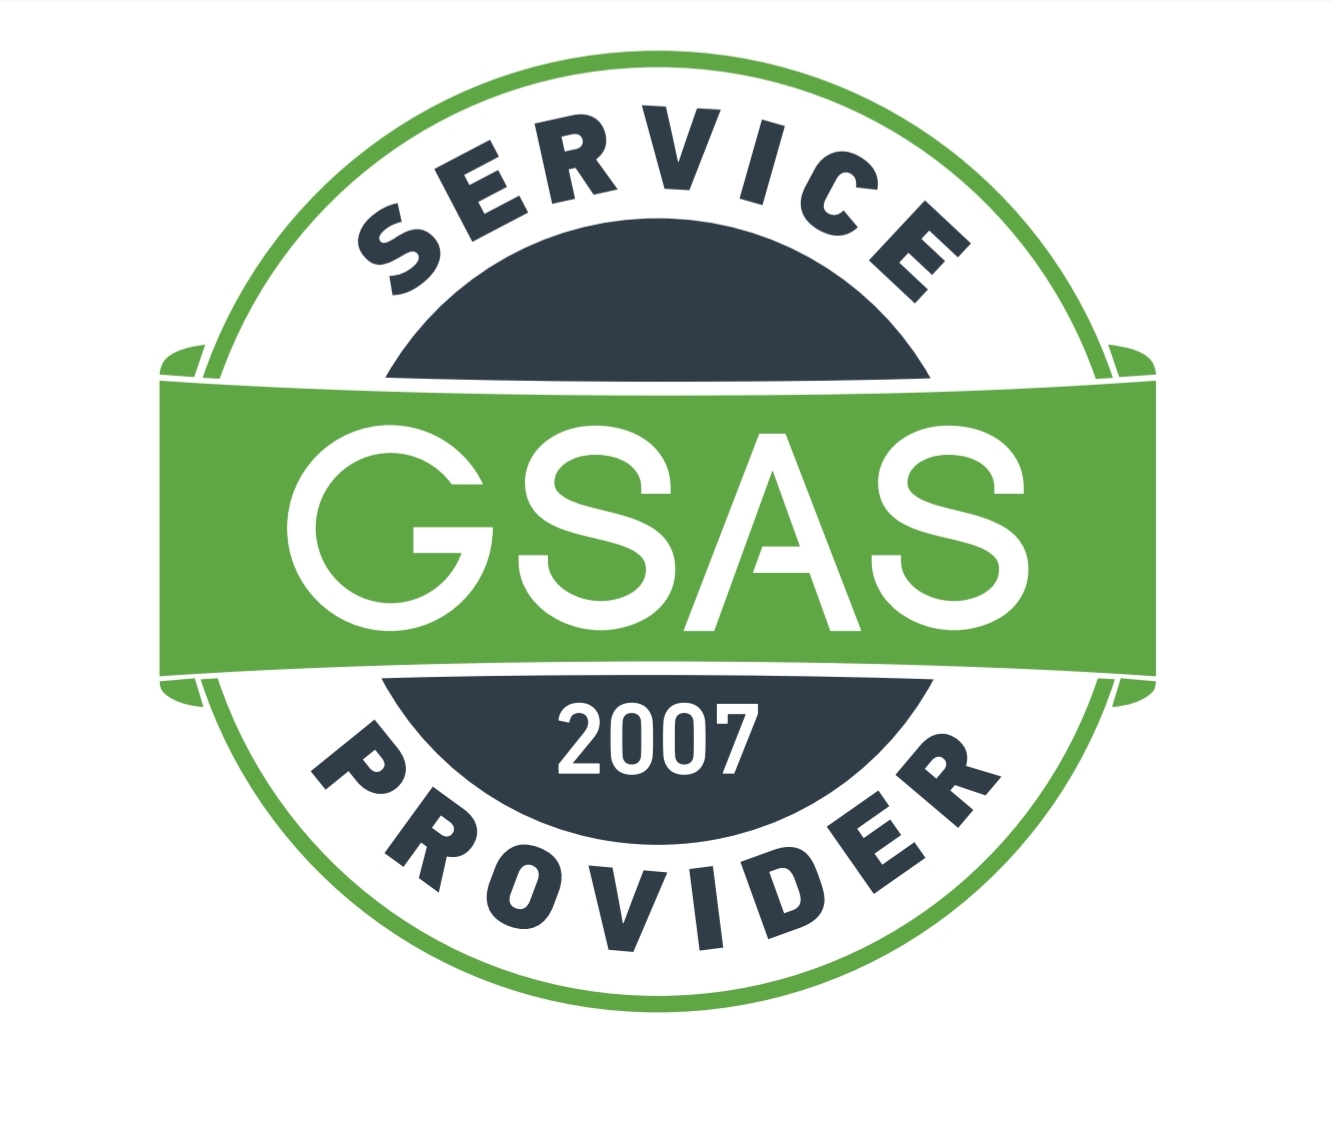 SHEMS is GSAS DESIGN & Building SERVICE PROVIDER NOW!